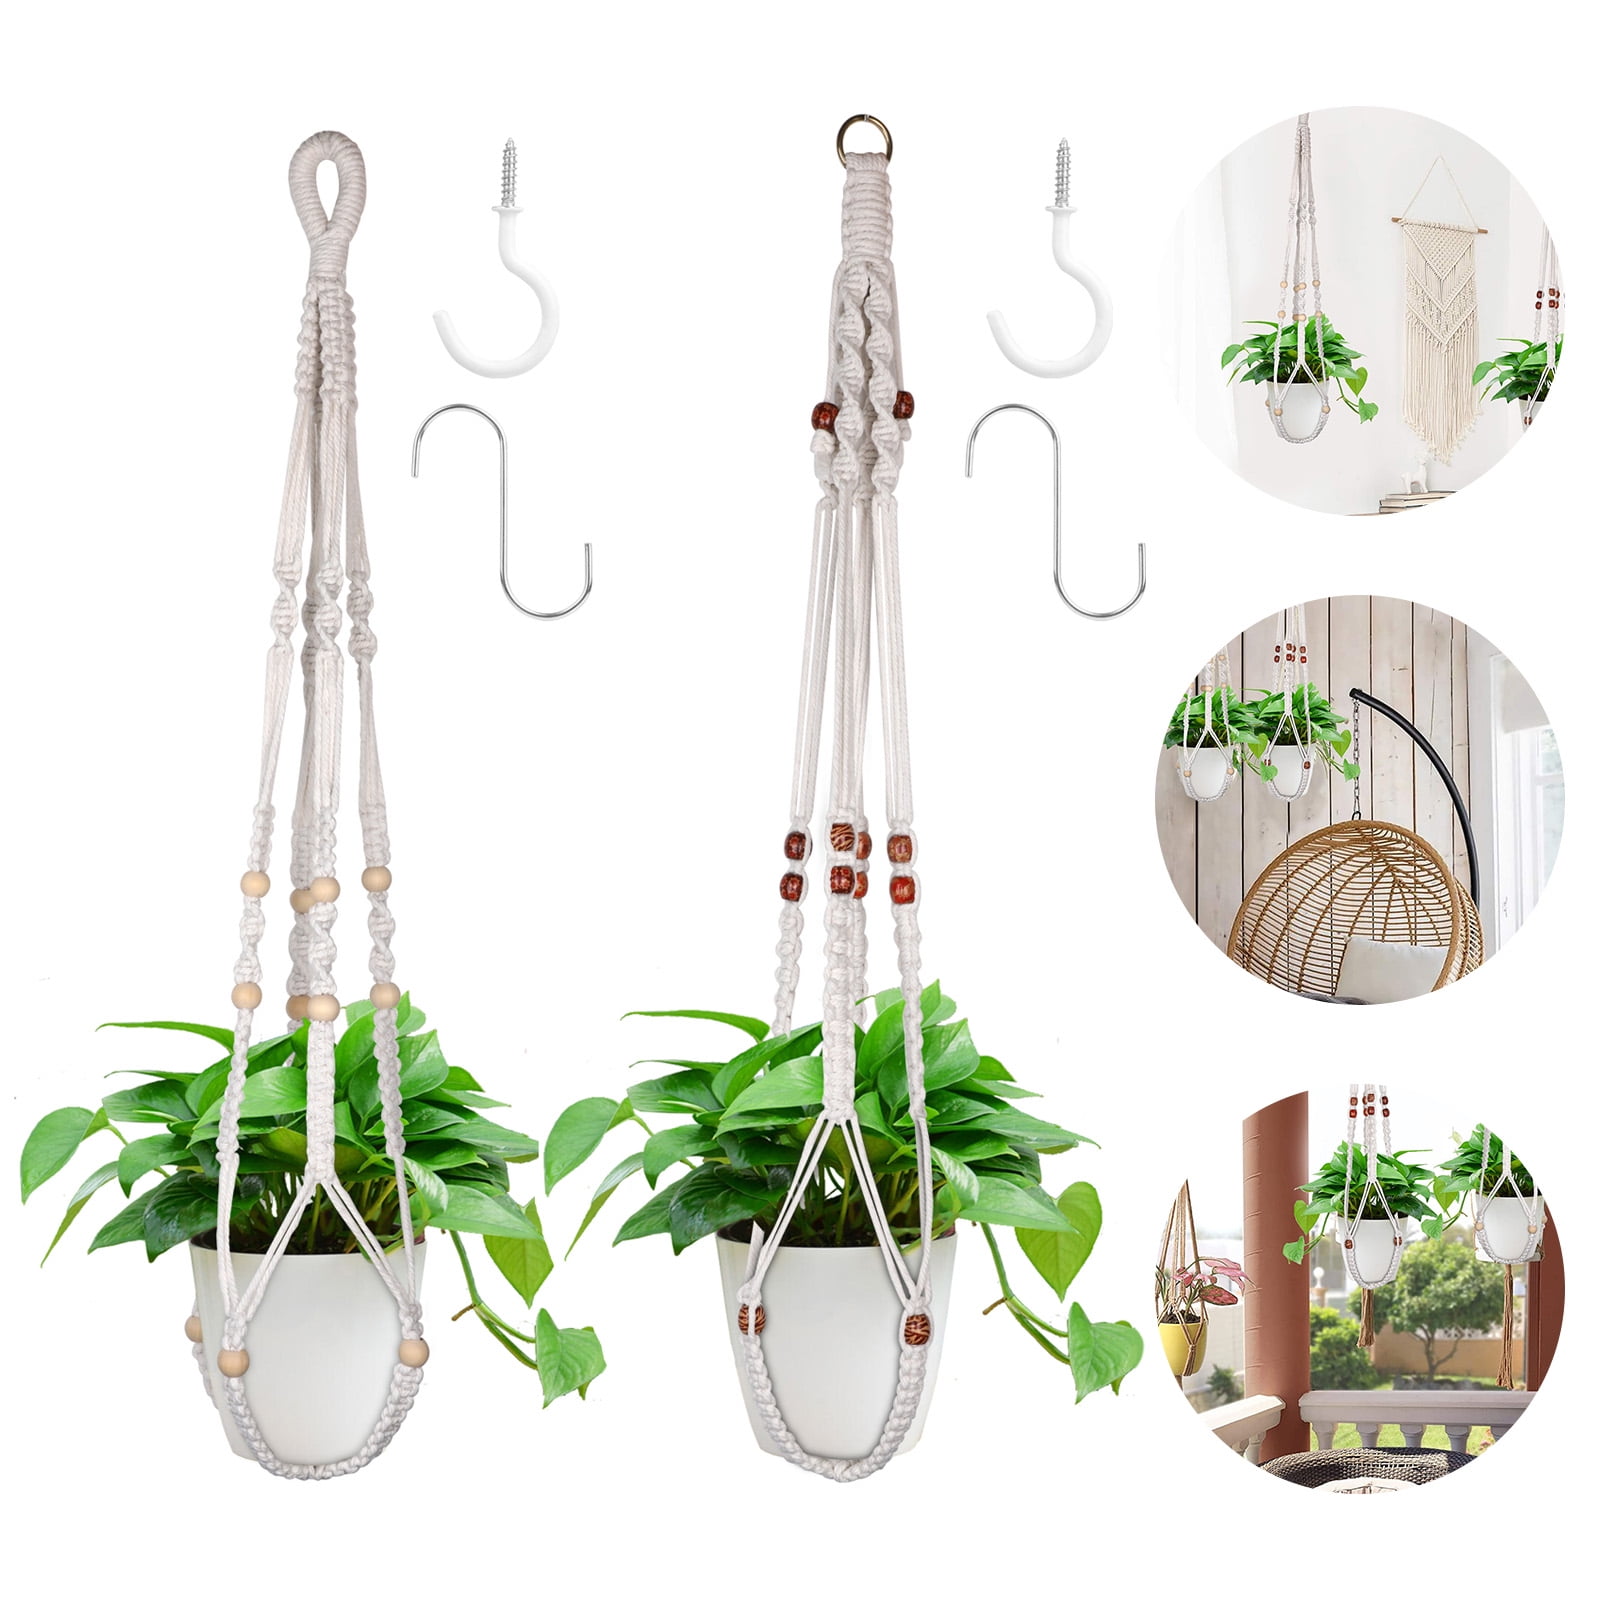 5 DOUBLE PLANT HANGER LAYER MACRAME COLORFUL OUTDOOR GARDEN HOME HANDMADE wHOOKS 